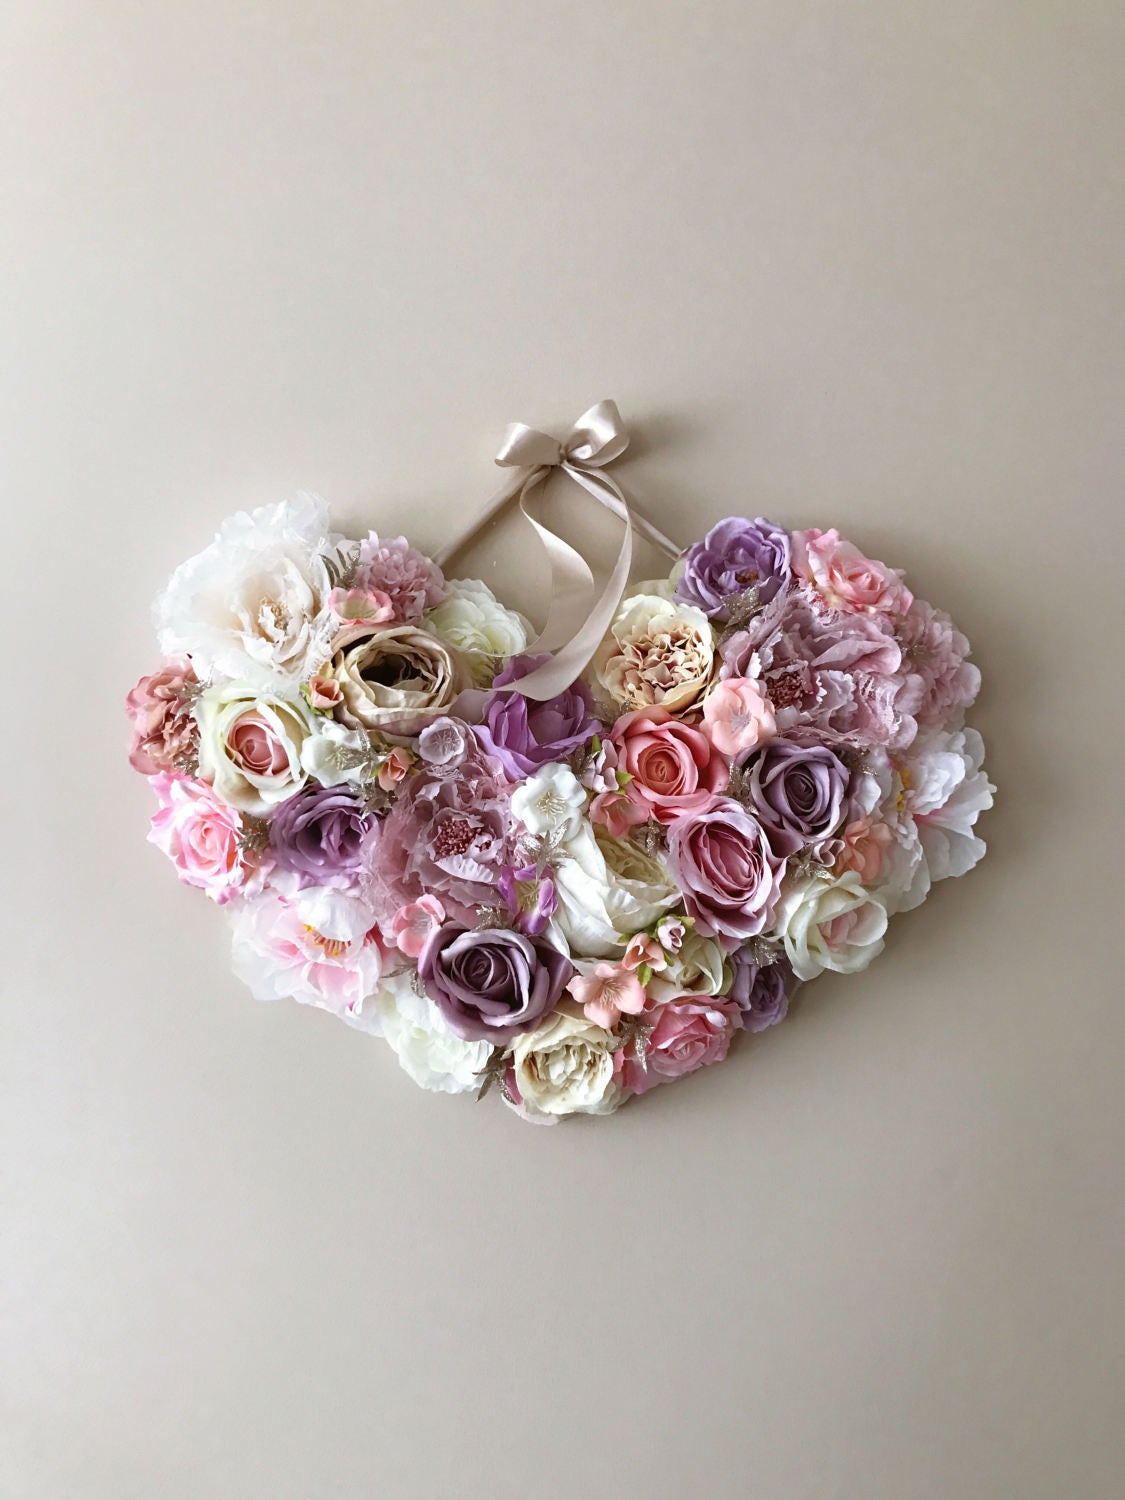 Mothers day gift, Heart, Flower girl gift, Baby pink, Nursery decor, Nursery hanging heart / Baby shower gift, Photography Prop